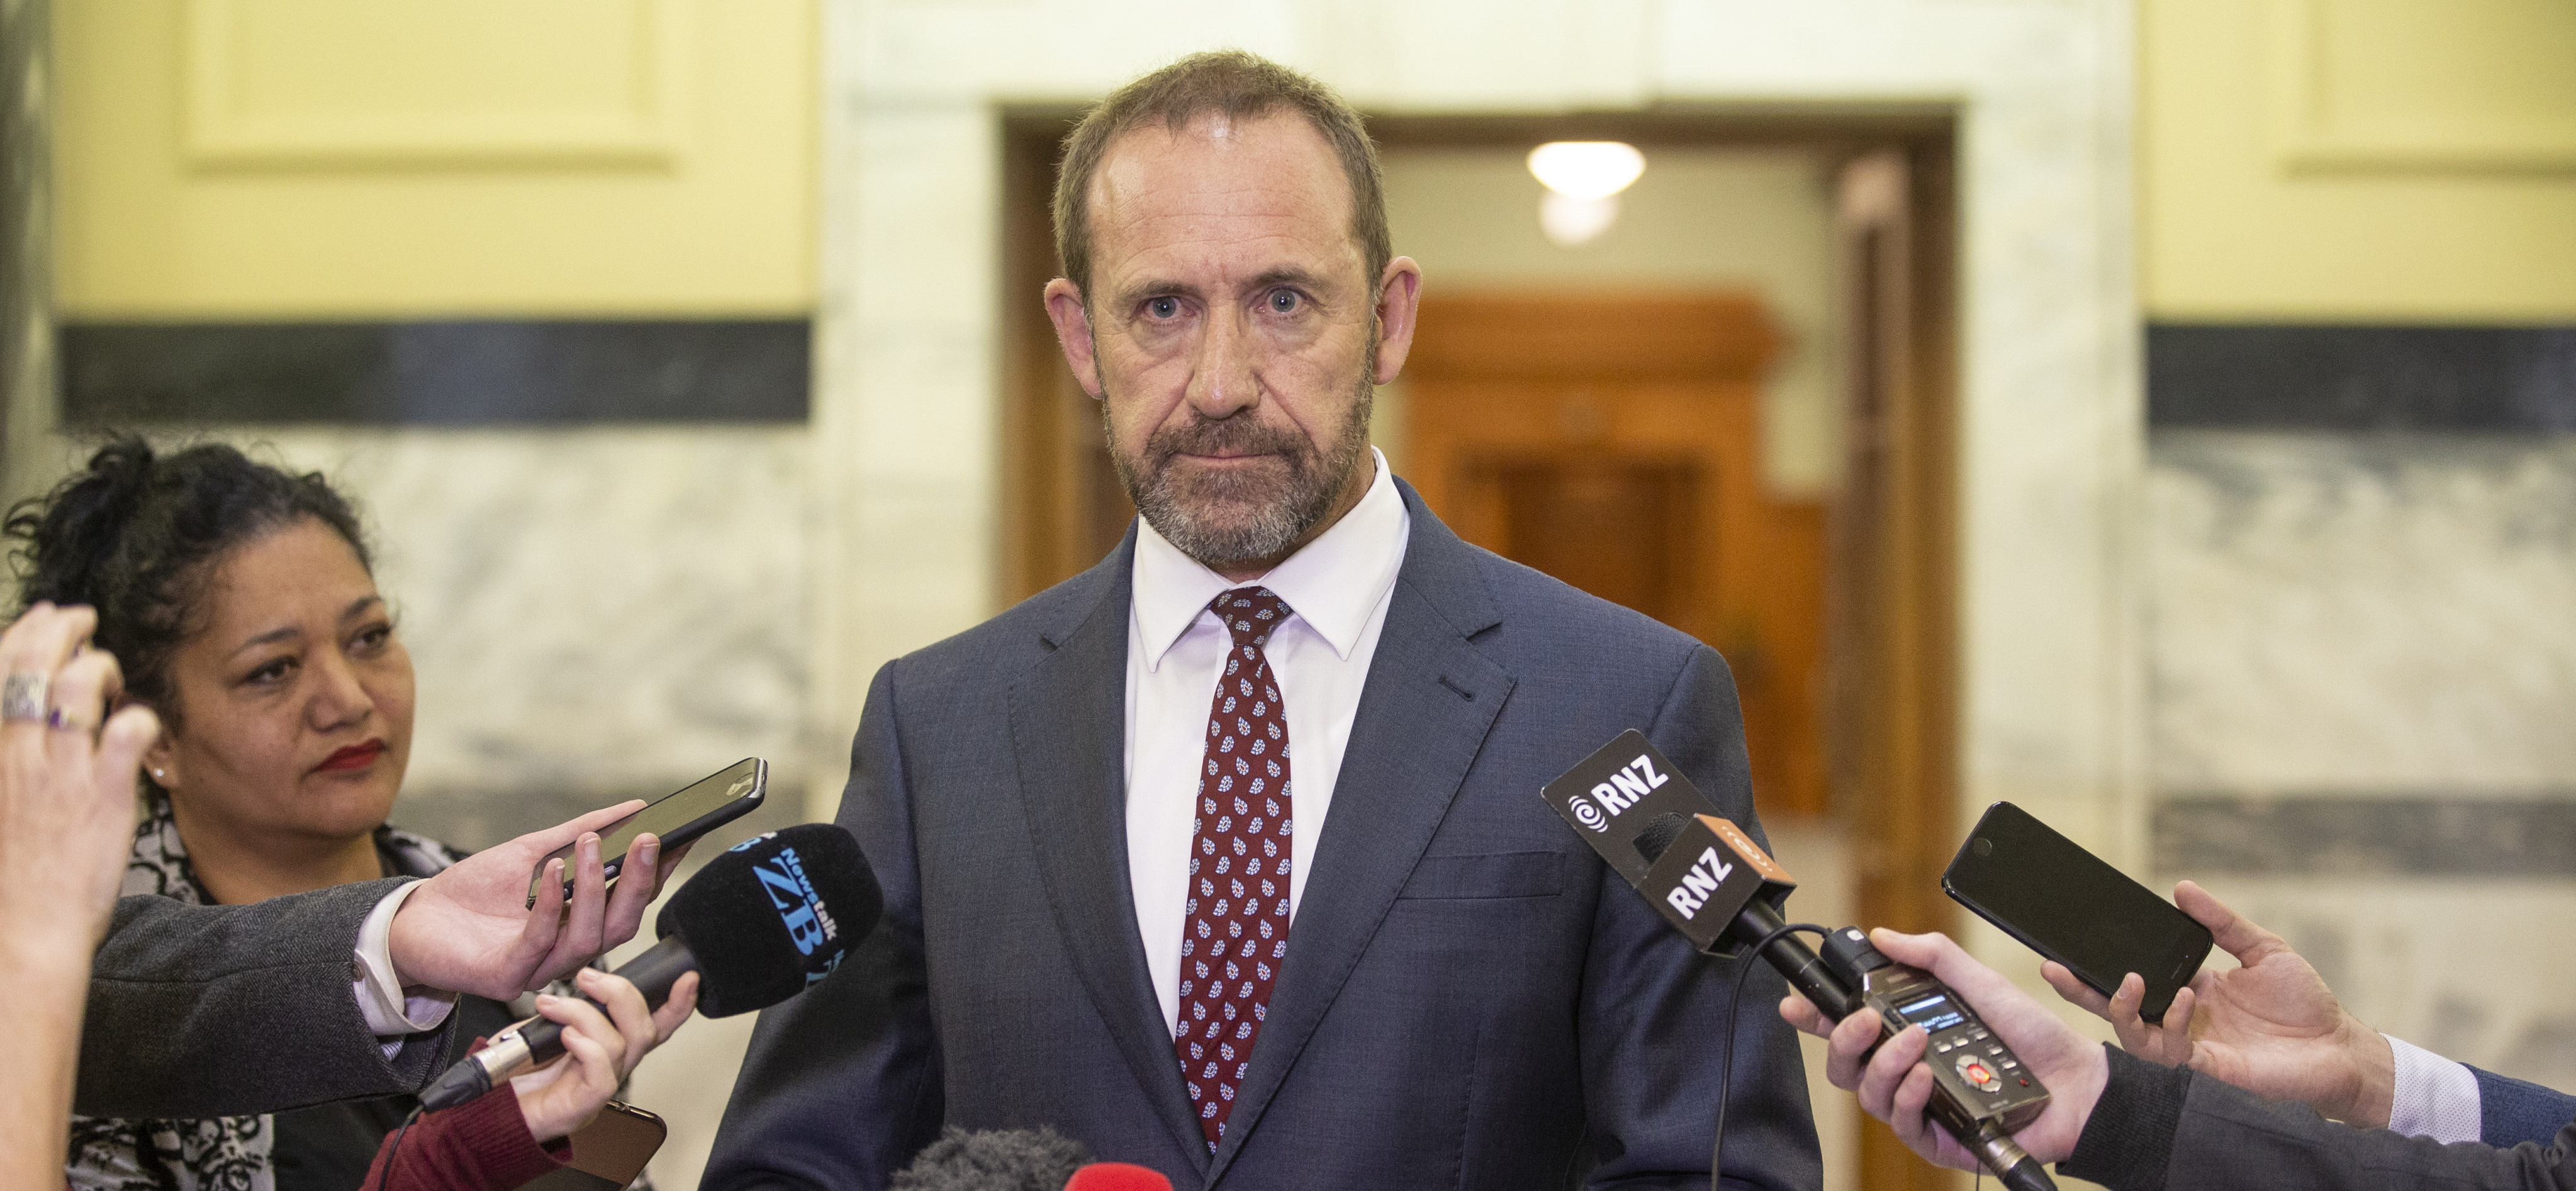 Defence Minister Andrew Little at a parliament press conference on June 1, 2018, when he served as the justice minister. Photo: New Zealand Herald